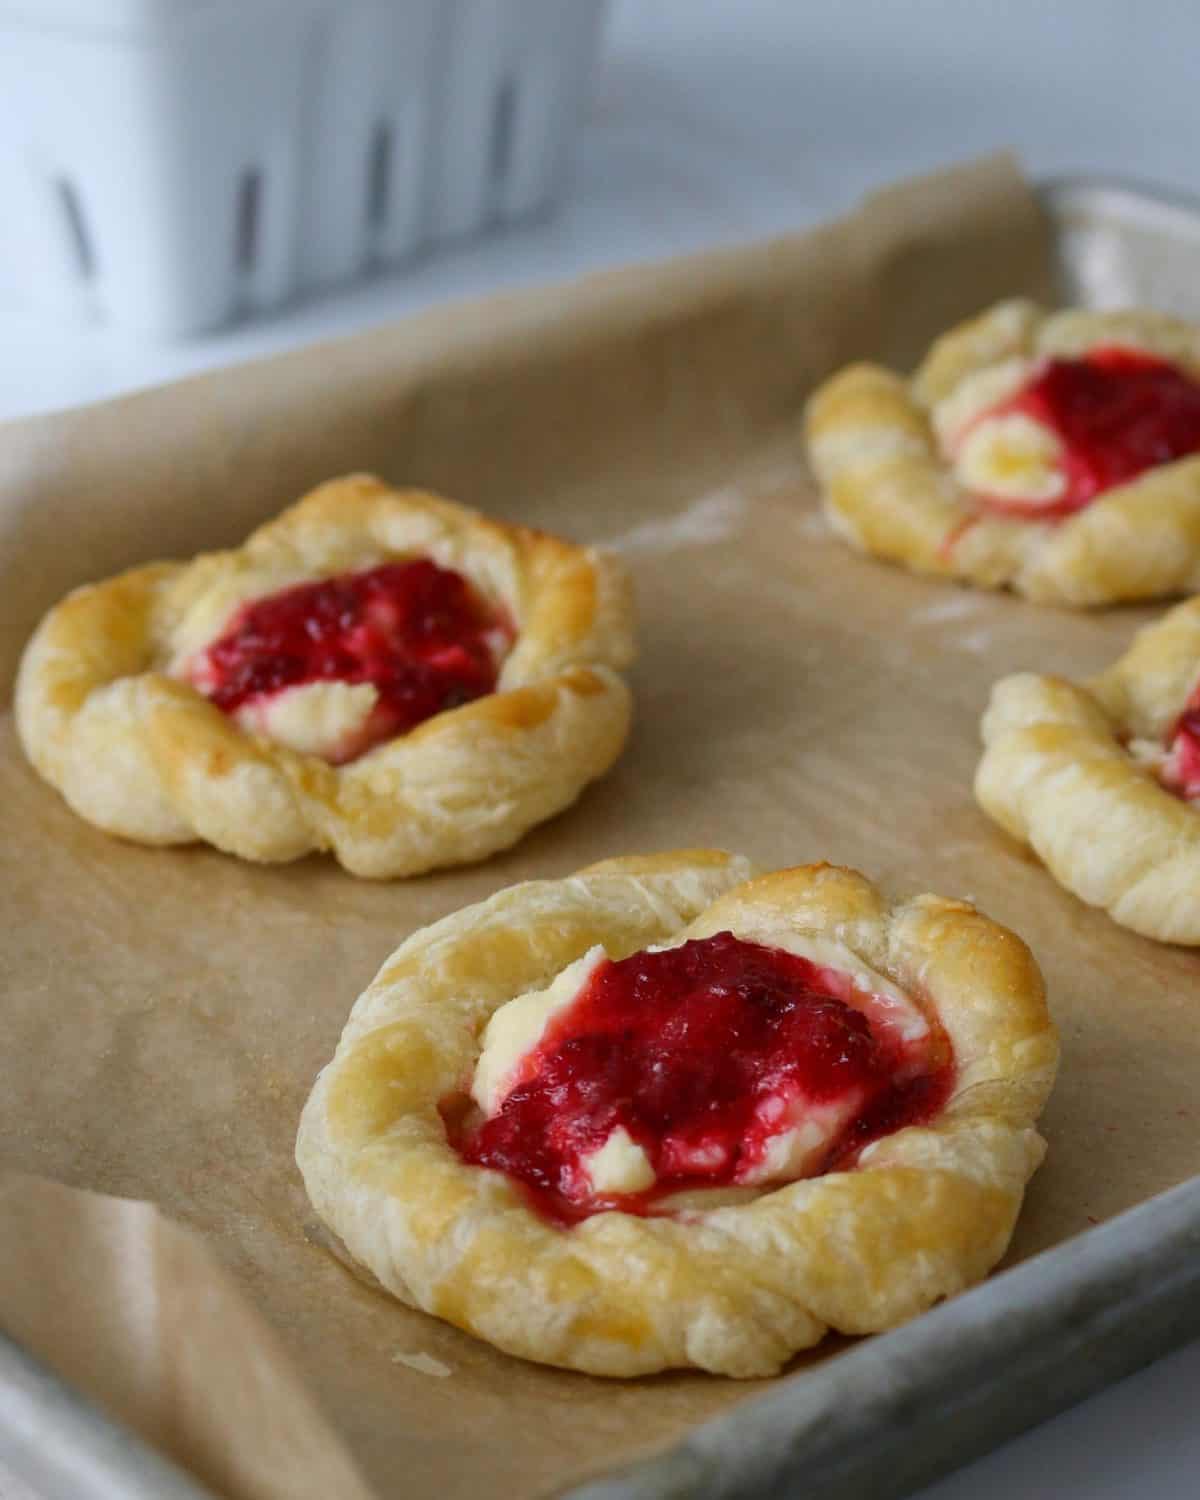 An overhead shot of strawberry pastry.